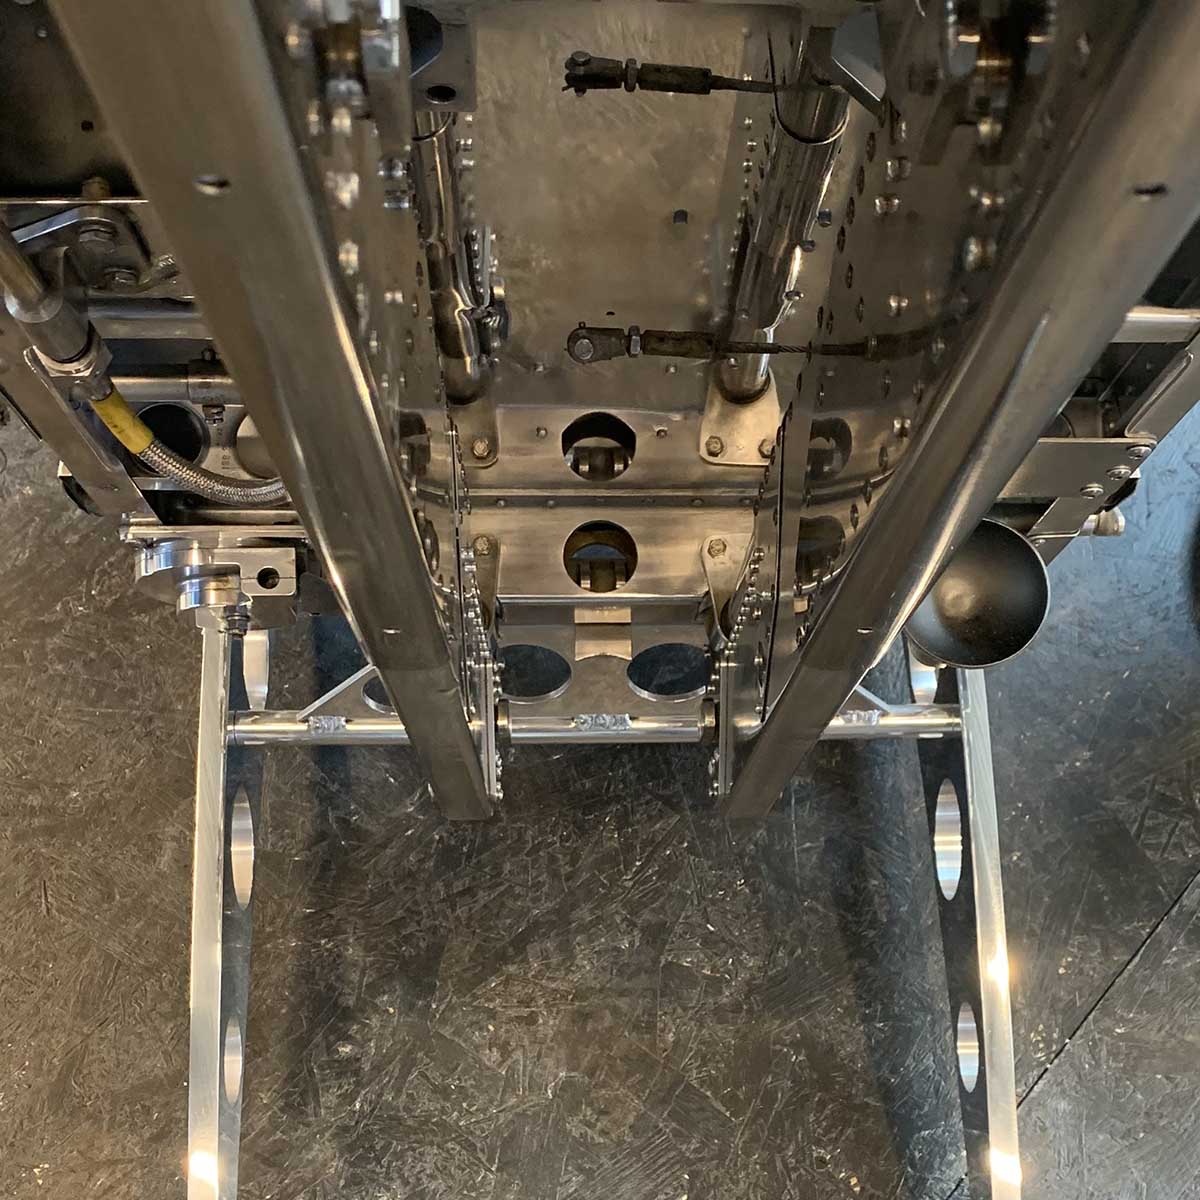 Back side of totally overhauled Martin-Baker Mk6 ejection seat.